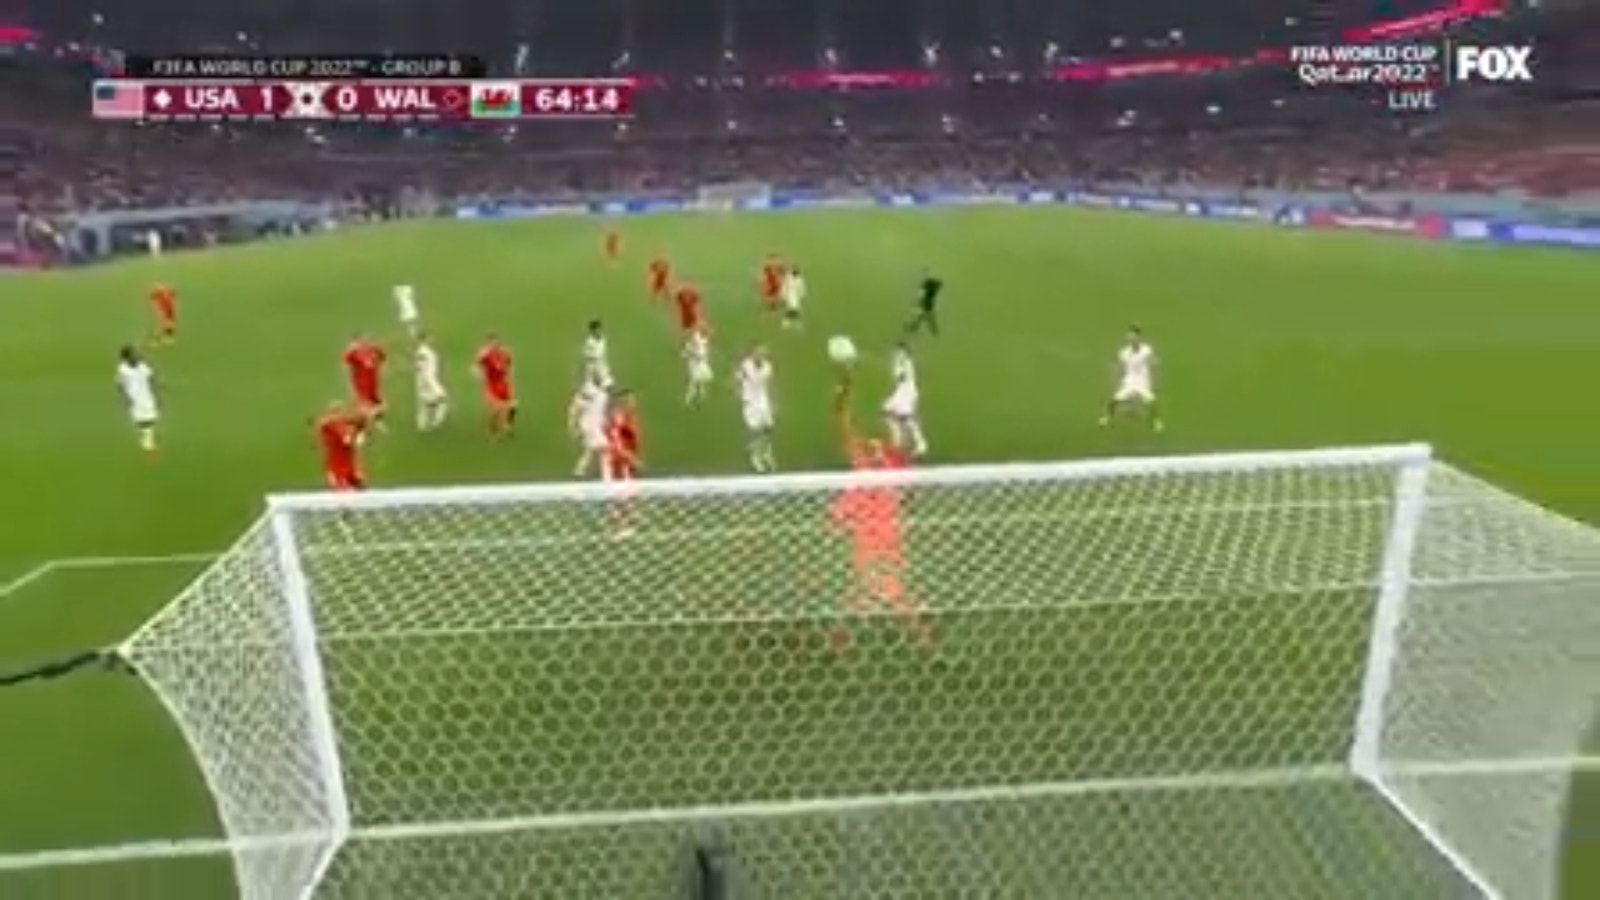 Matt Turner makes incredible save for the USA off a strong header from the center